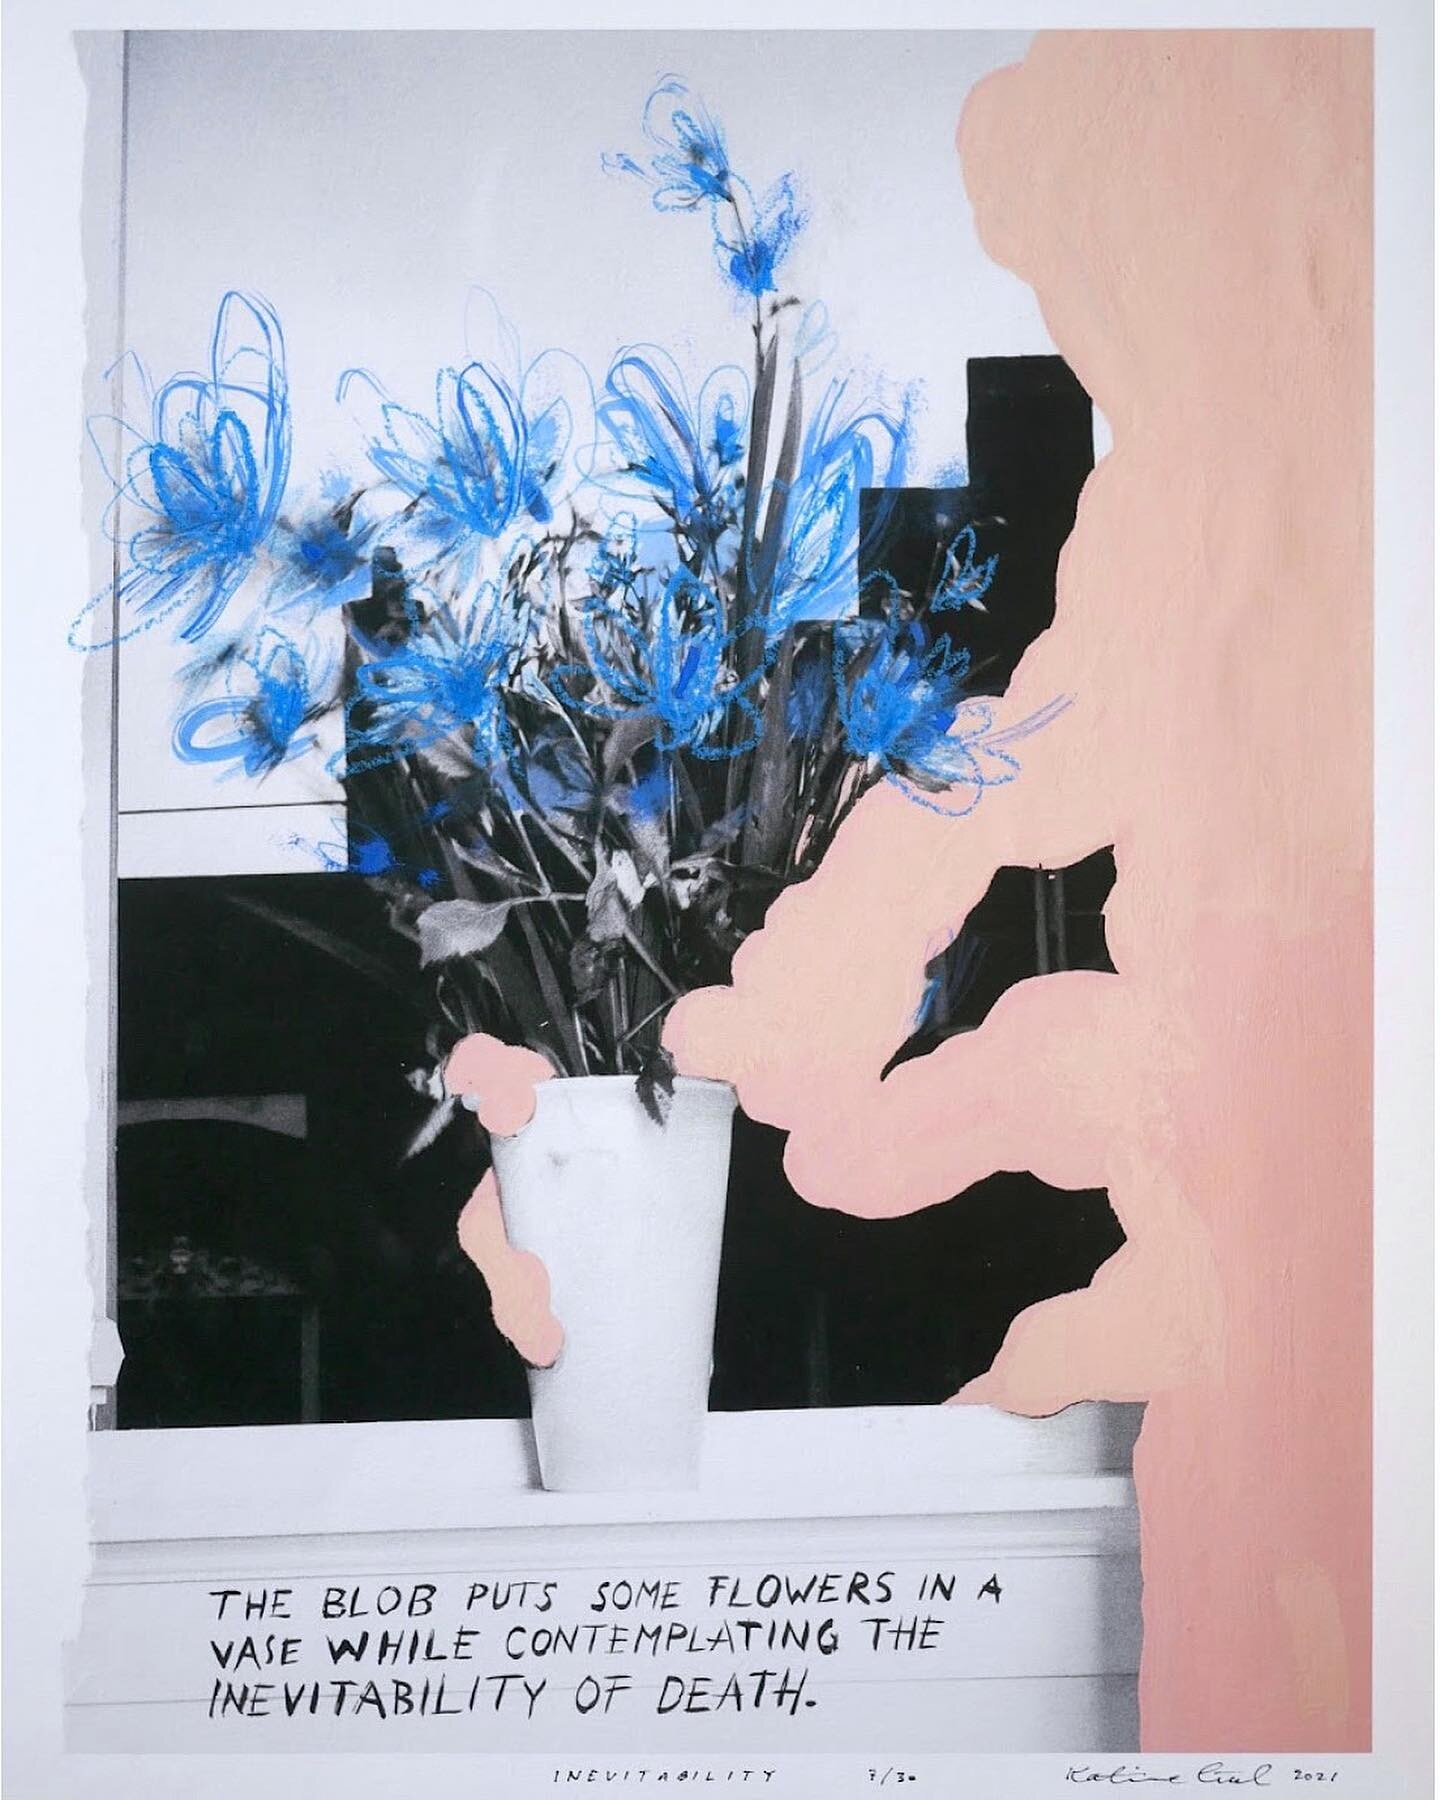 (The Blob puts some flowers in a vase while contemplating the) INEVITABILITY (of death.) 🌷

These works are the results of a long process &mdash; from a discarded book on dutch interior design from @khiobiblioteket , pages ripped out and painted, as